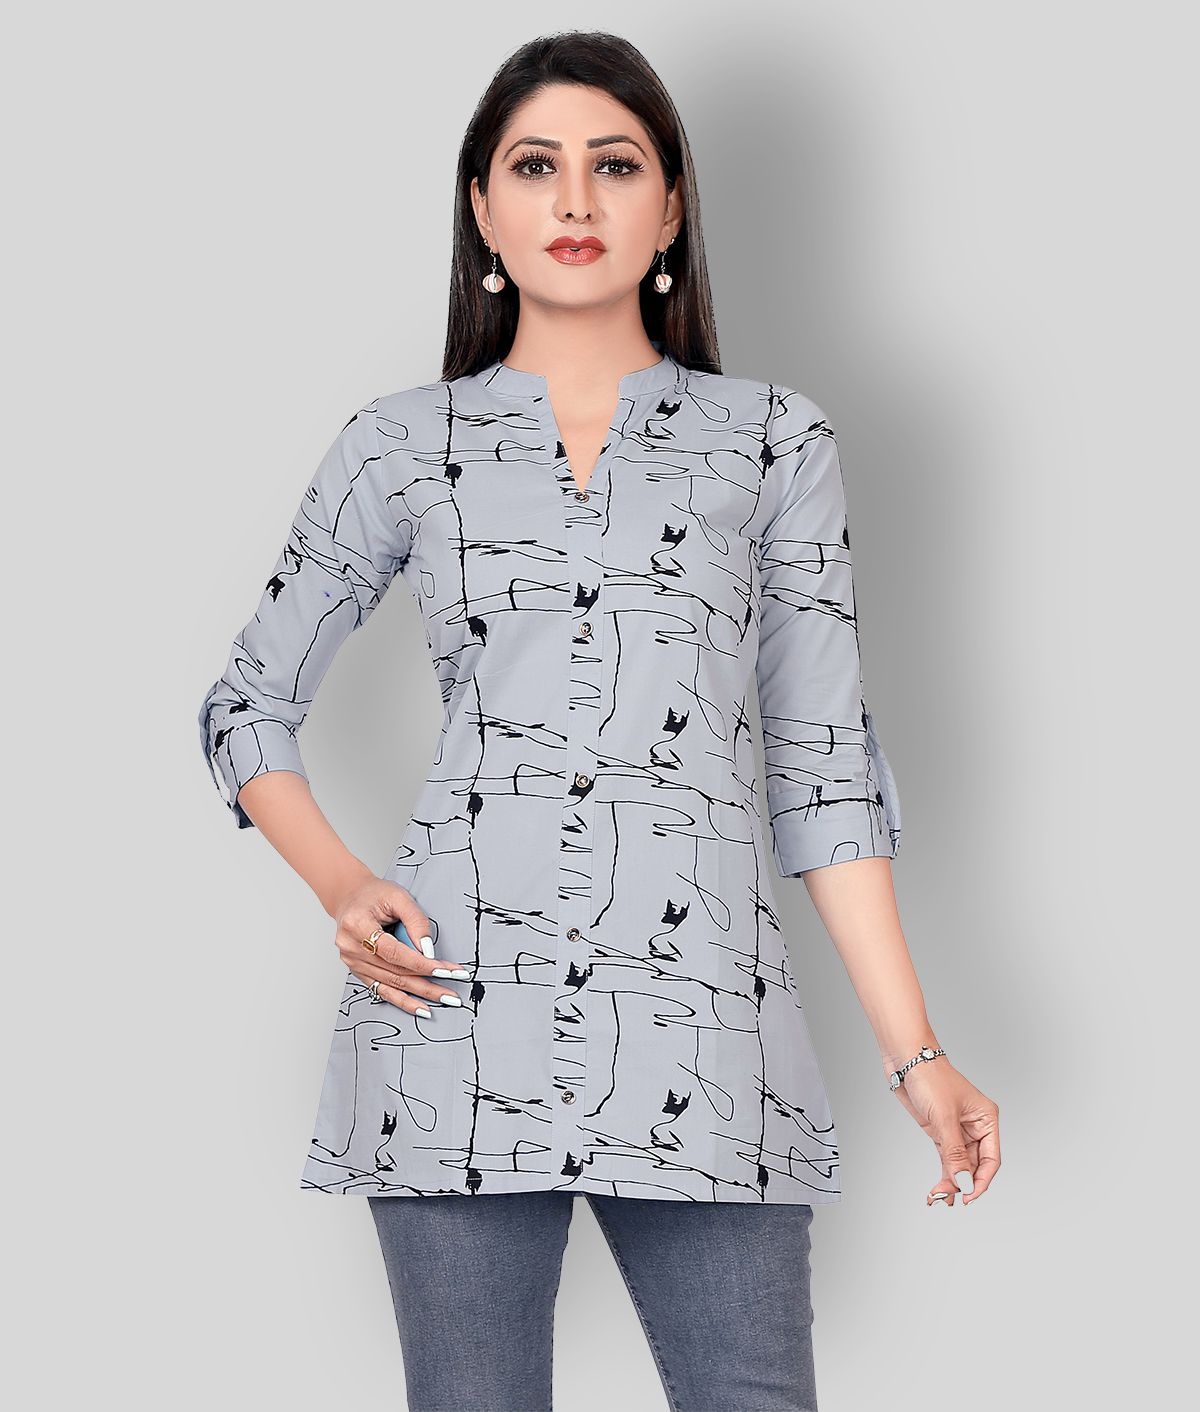     			Meher Impex - Light Grey Cotton Women's Straight Kurti ( Pack of 1 )